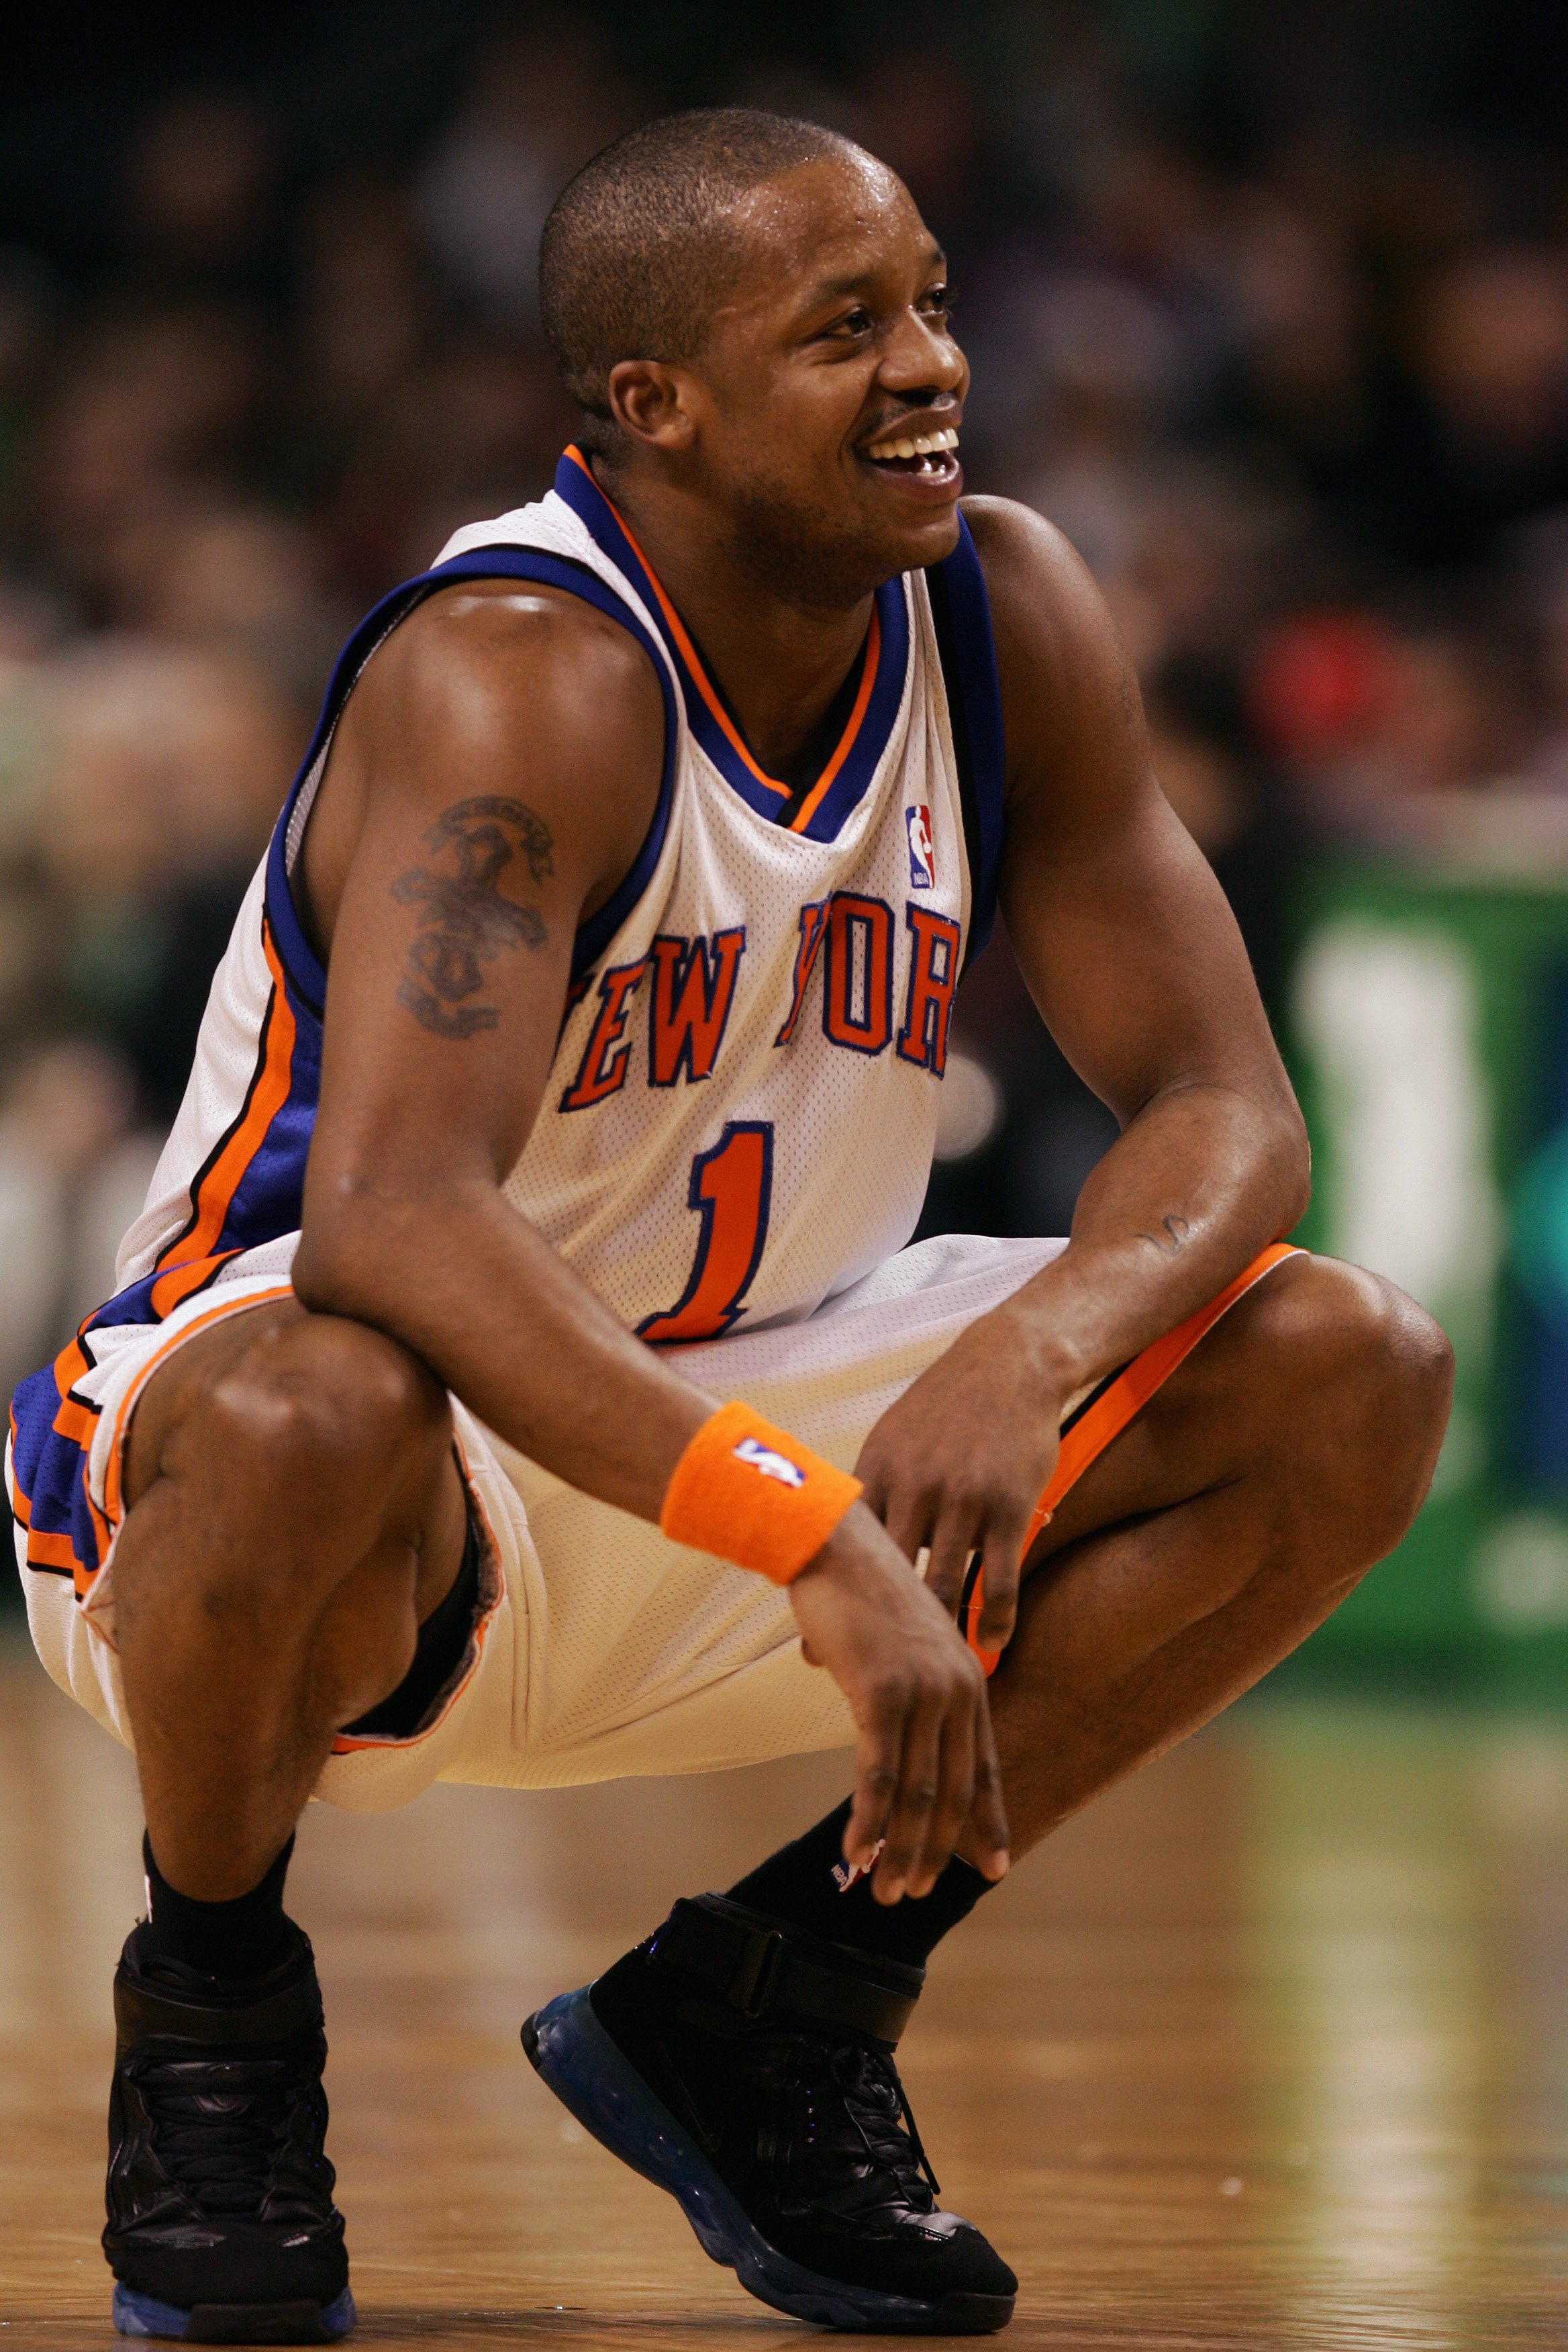 BOSTON - NOVEMBER 24:  Steve Francis #1 of the New York Knicks on the court during a game against the Boston Celtics at the TD Banknorth Garden on November 24, 2006 in Boston, Massachusetts.  The New York Knicks defeated the Boston Celtics 101-77. NOTE TO